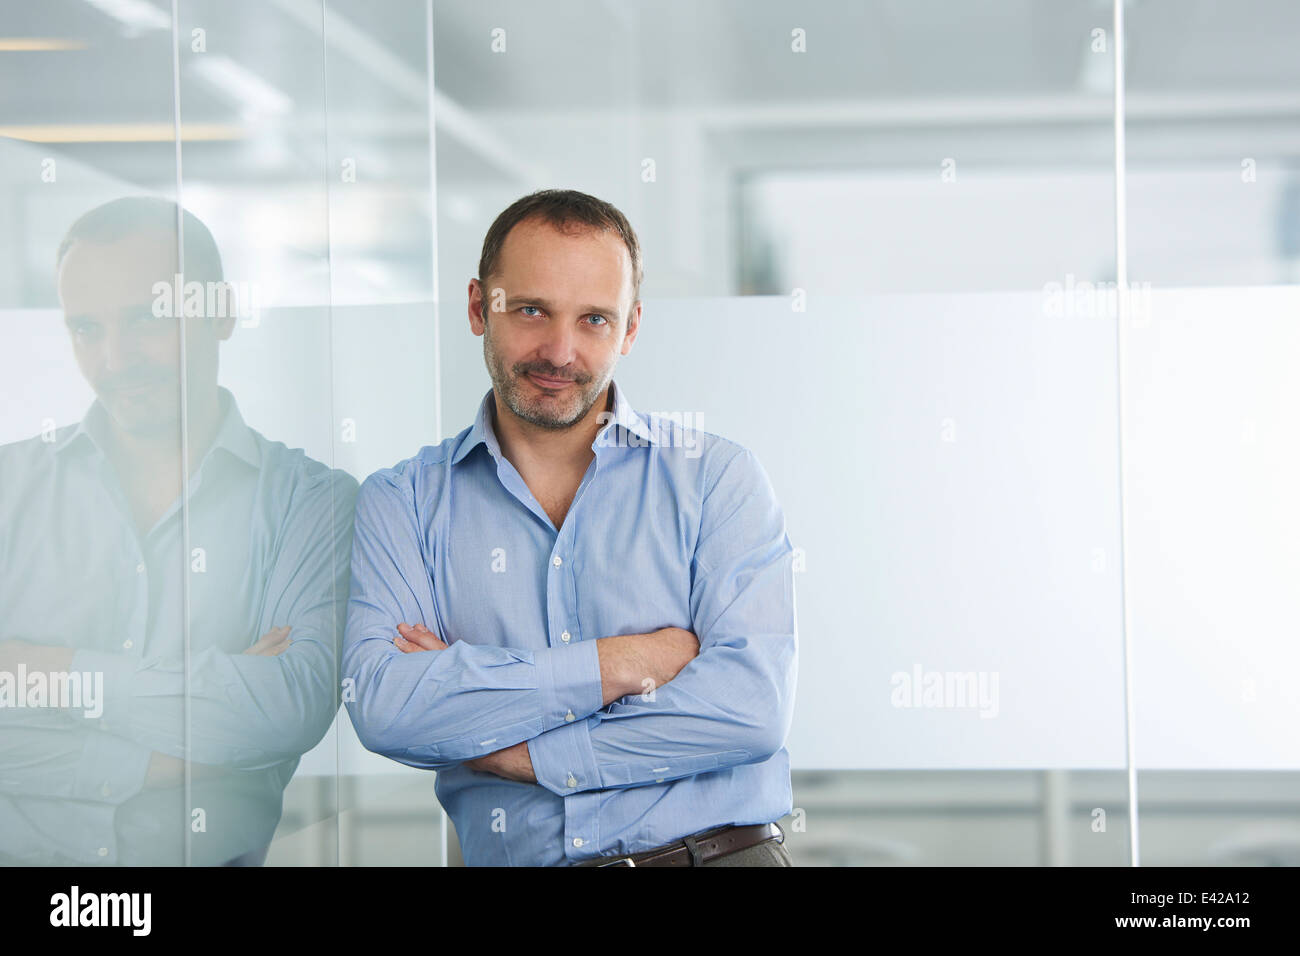 Businessman leaning against reflective wall Stock Photo